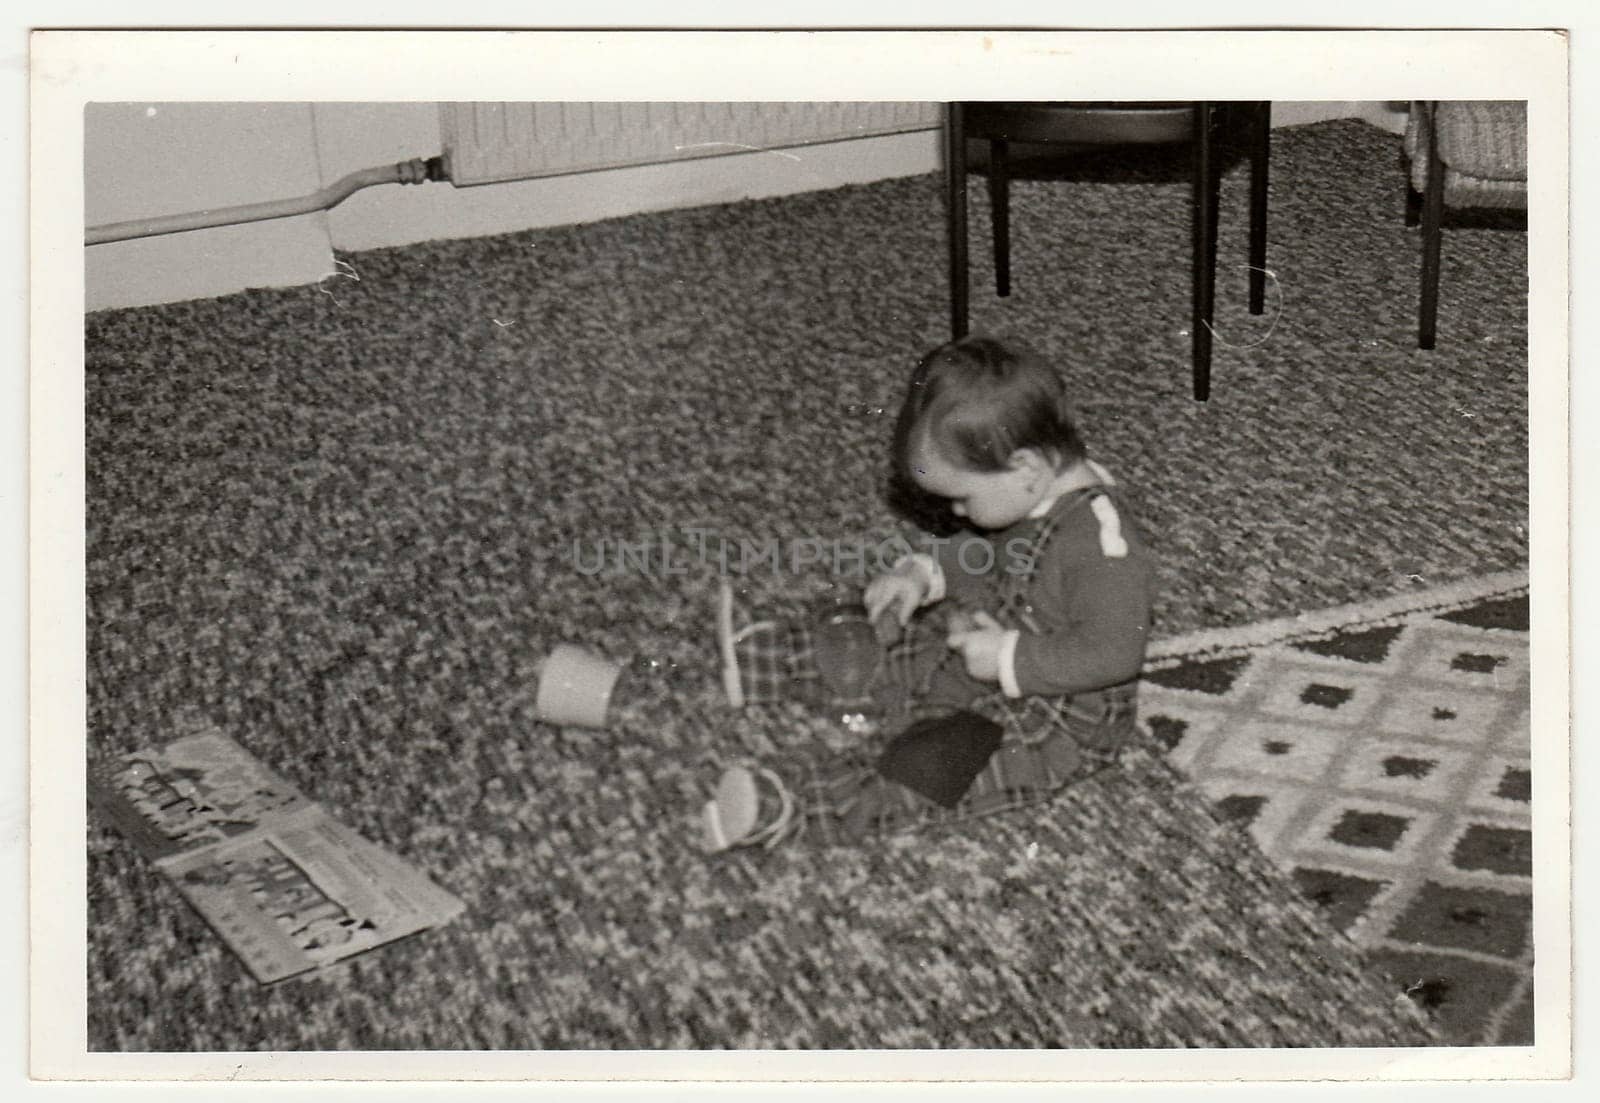 Retro photo shows child who plays with toy. Black and white vintage photography. by roman_nerud